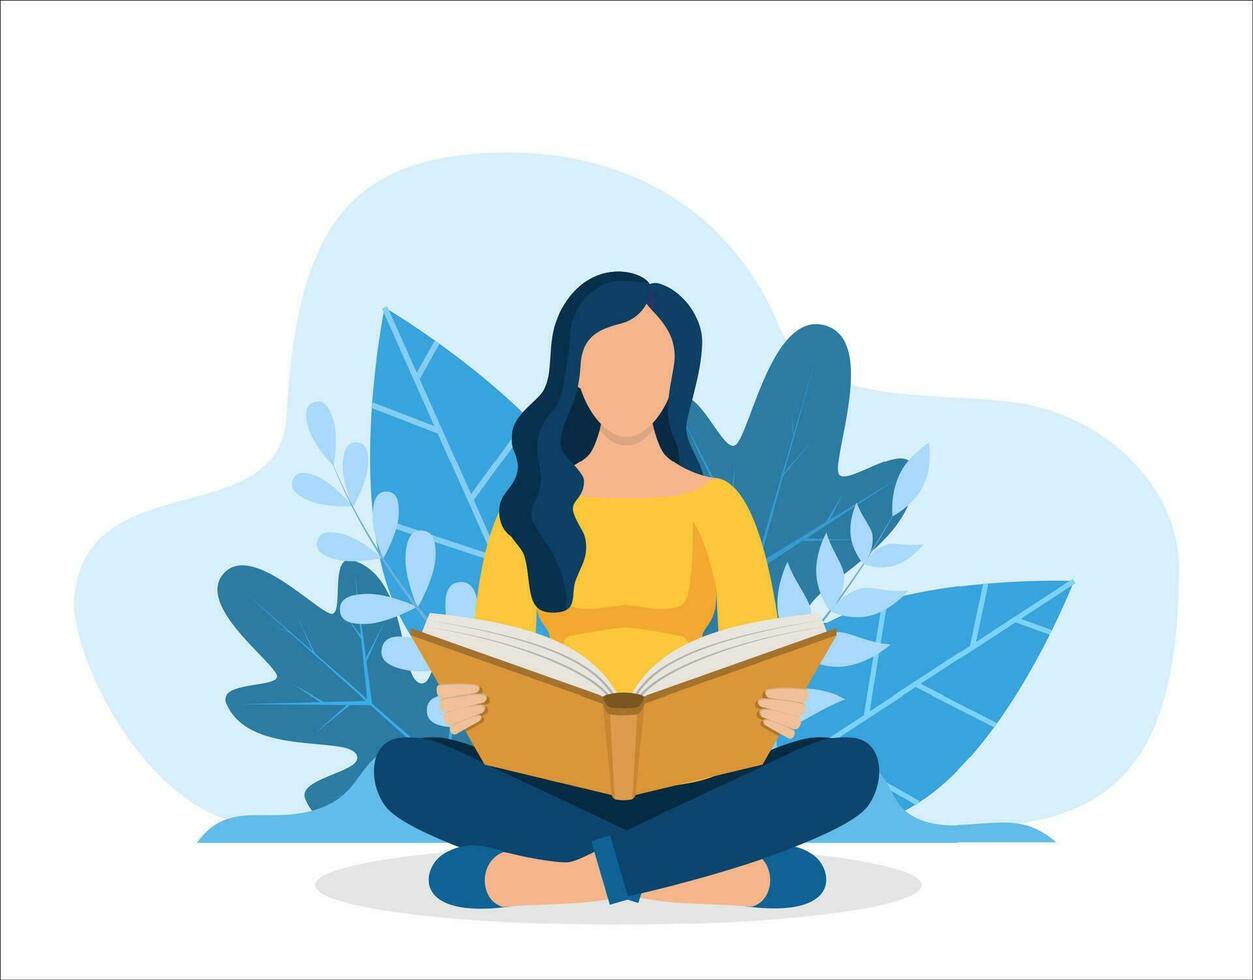 Young woman reading book sitting in nature. Education, reading, studying. Vector illustration in flat style. Vector illustration in flat style